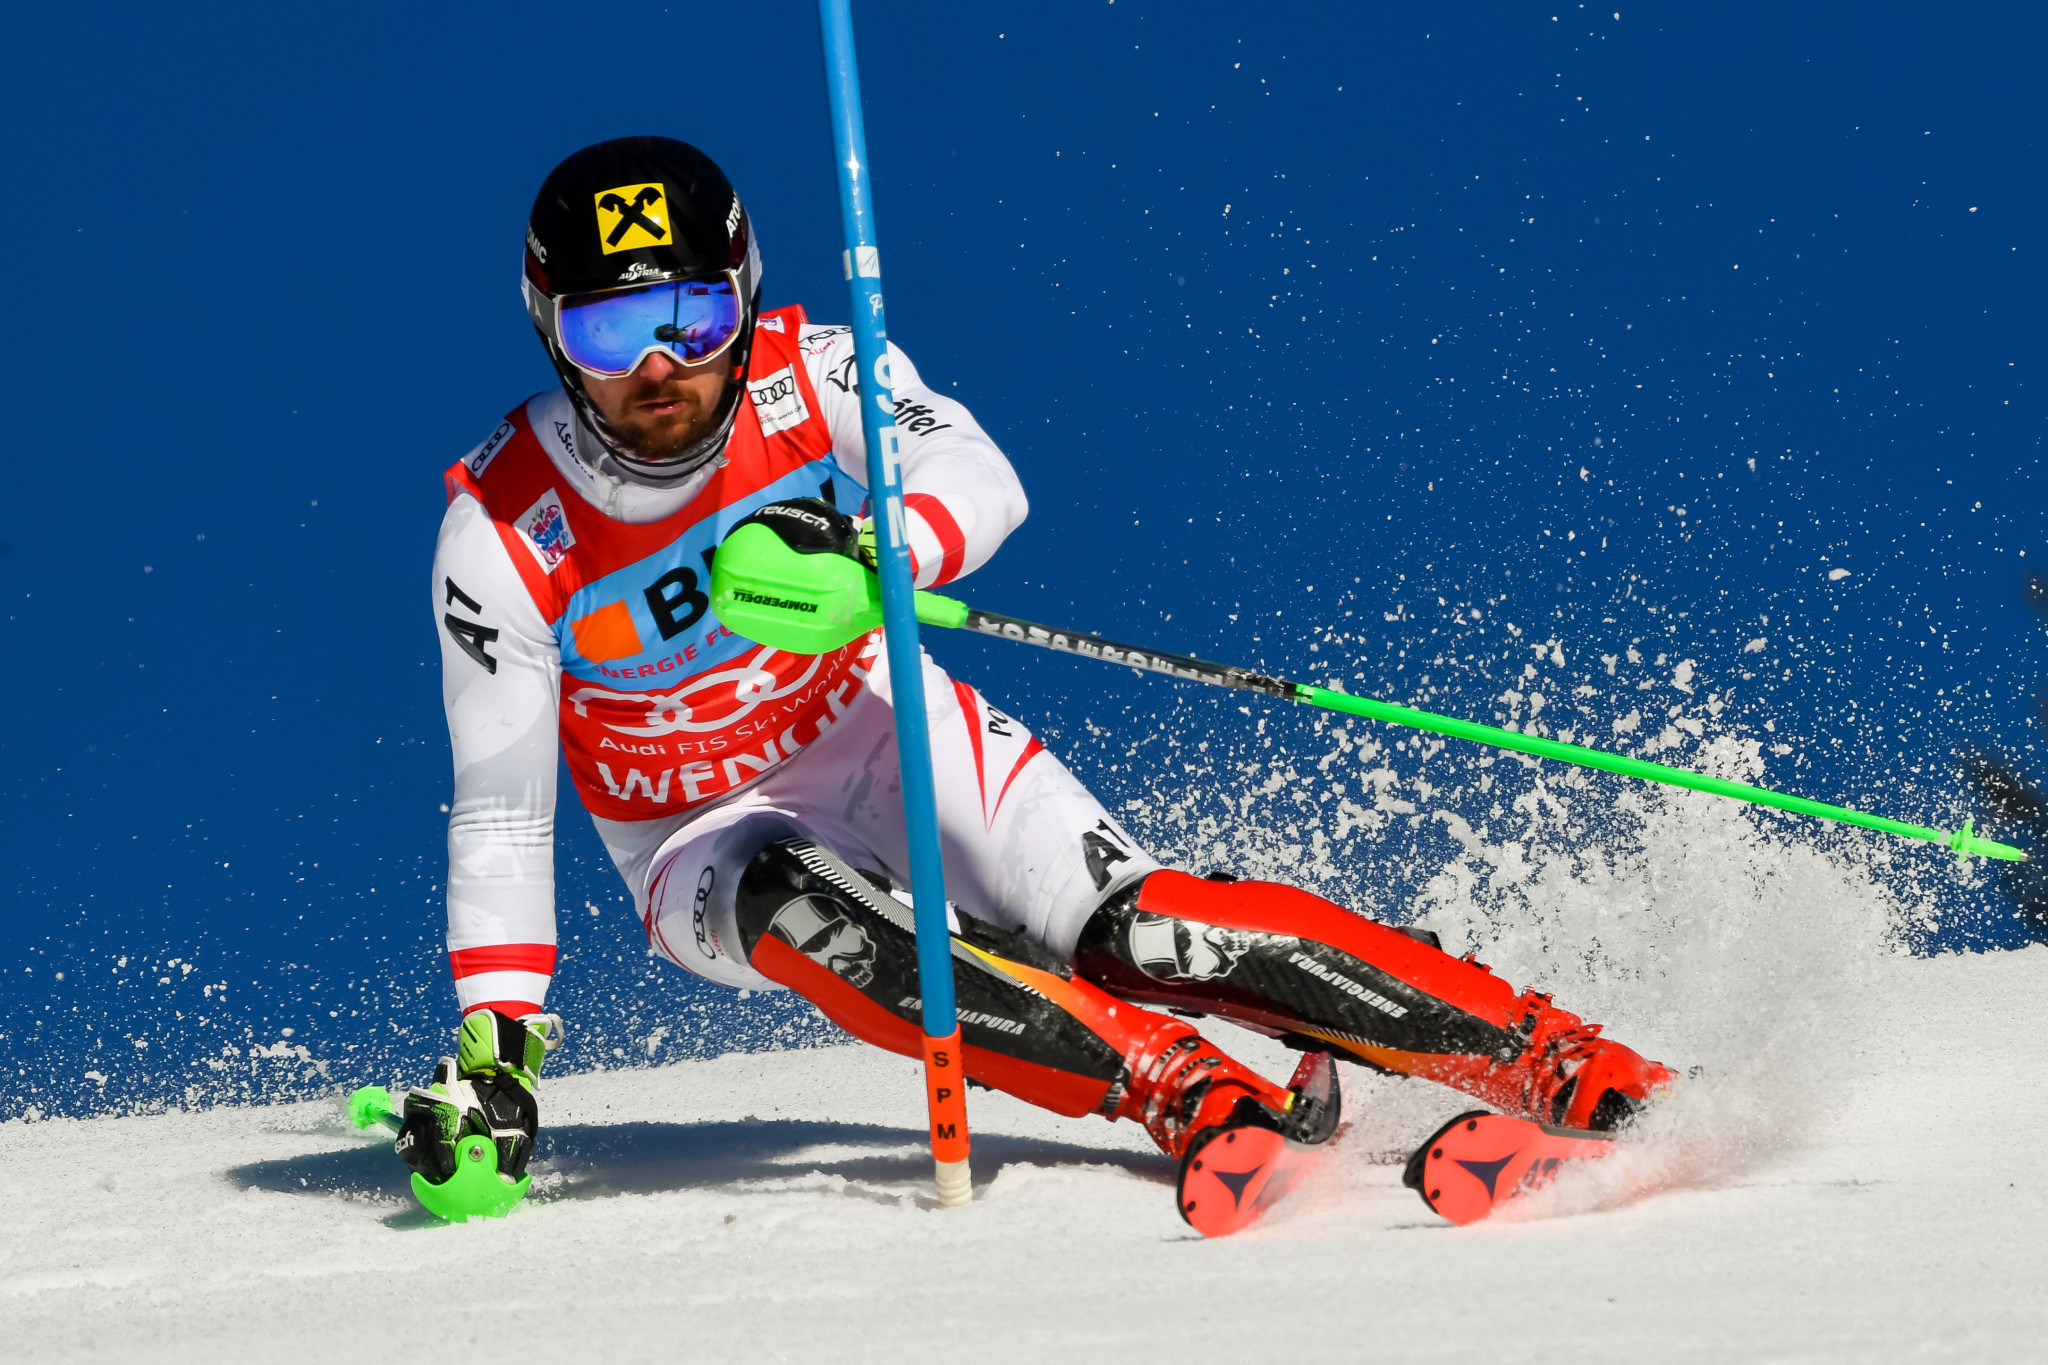 Austria's Marcel Hirscher tops the men's slalom rankings this season after winning each of the last five slalom events on the World Cup calendar ©Getty Images